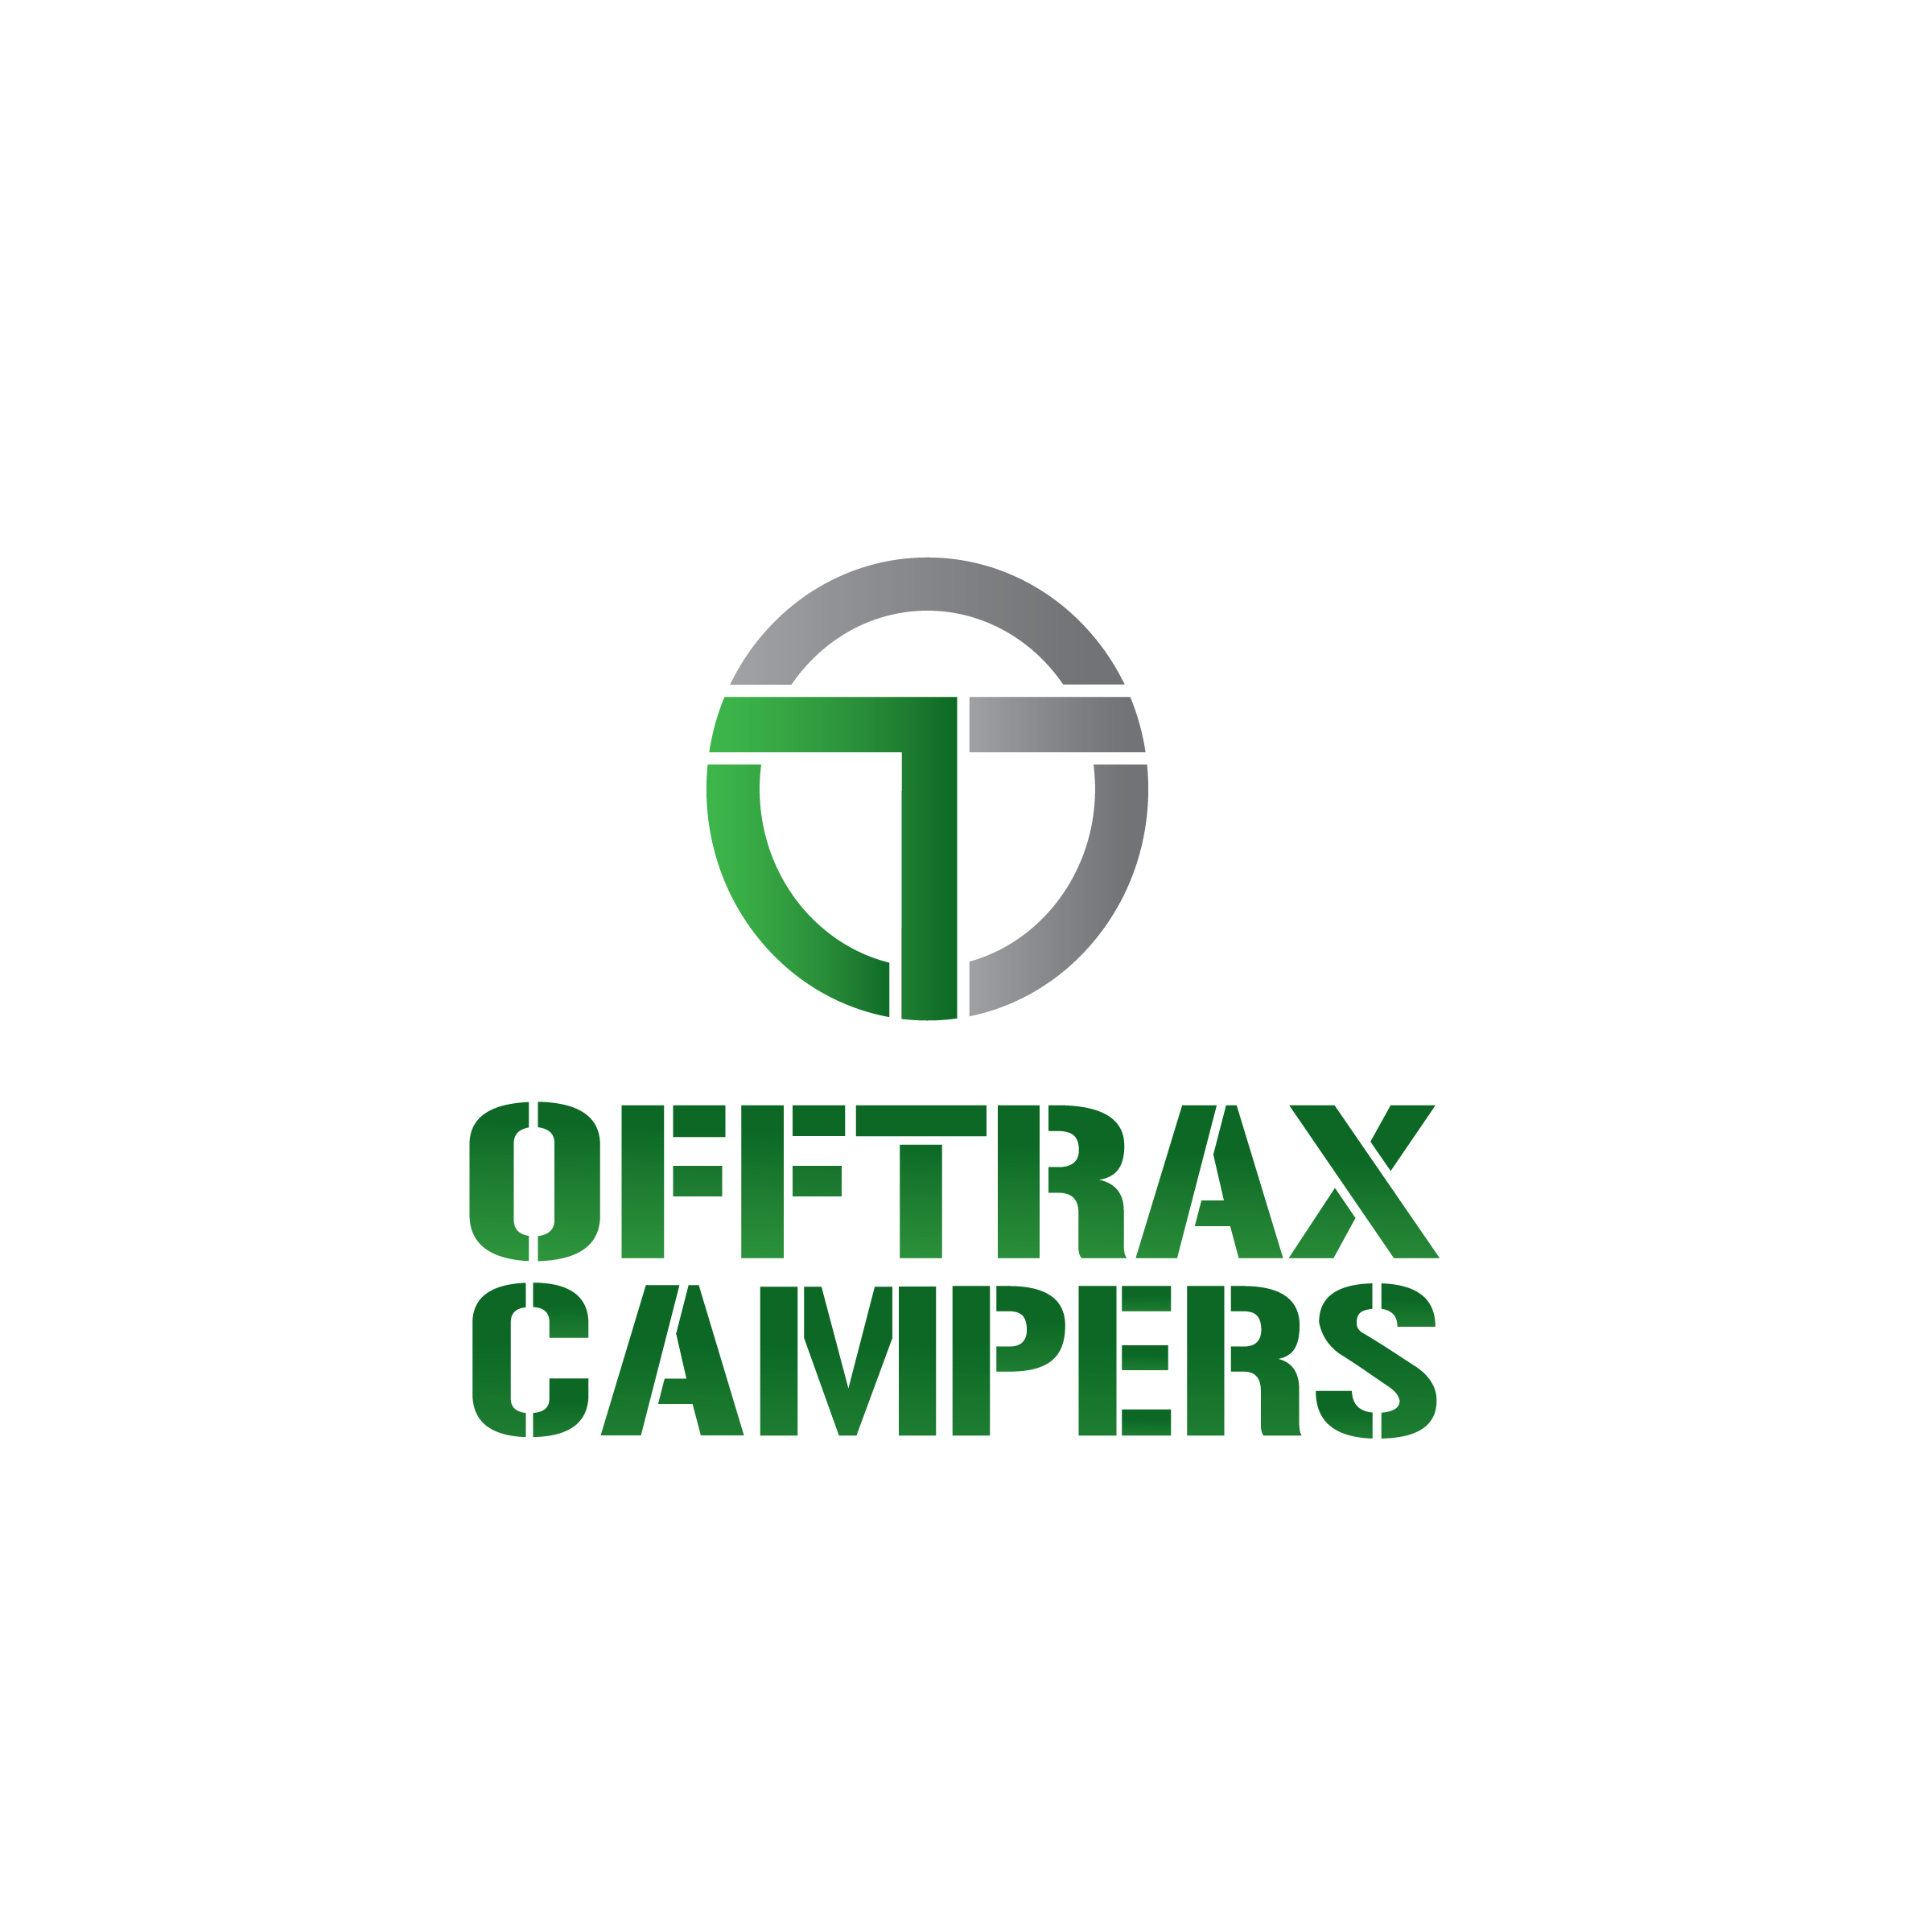 OFFTRAX CAMPERS